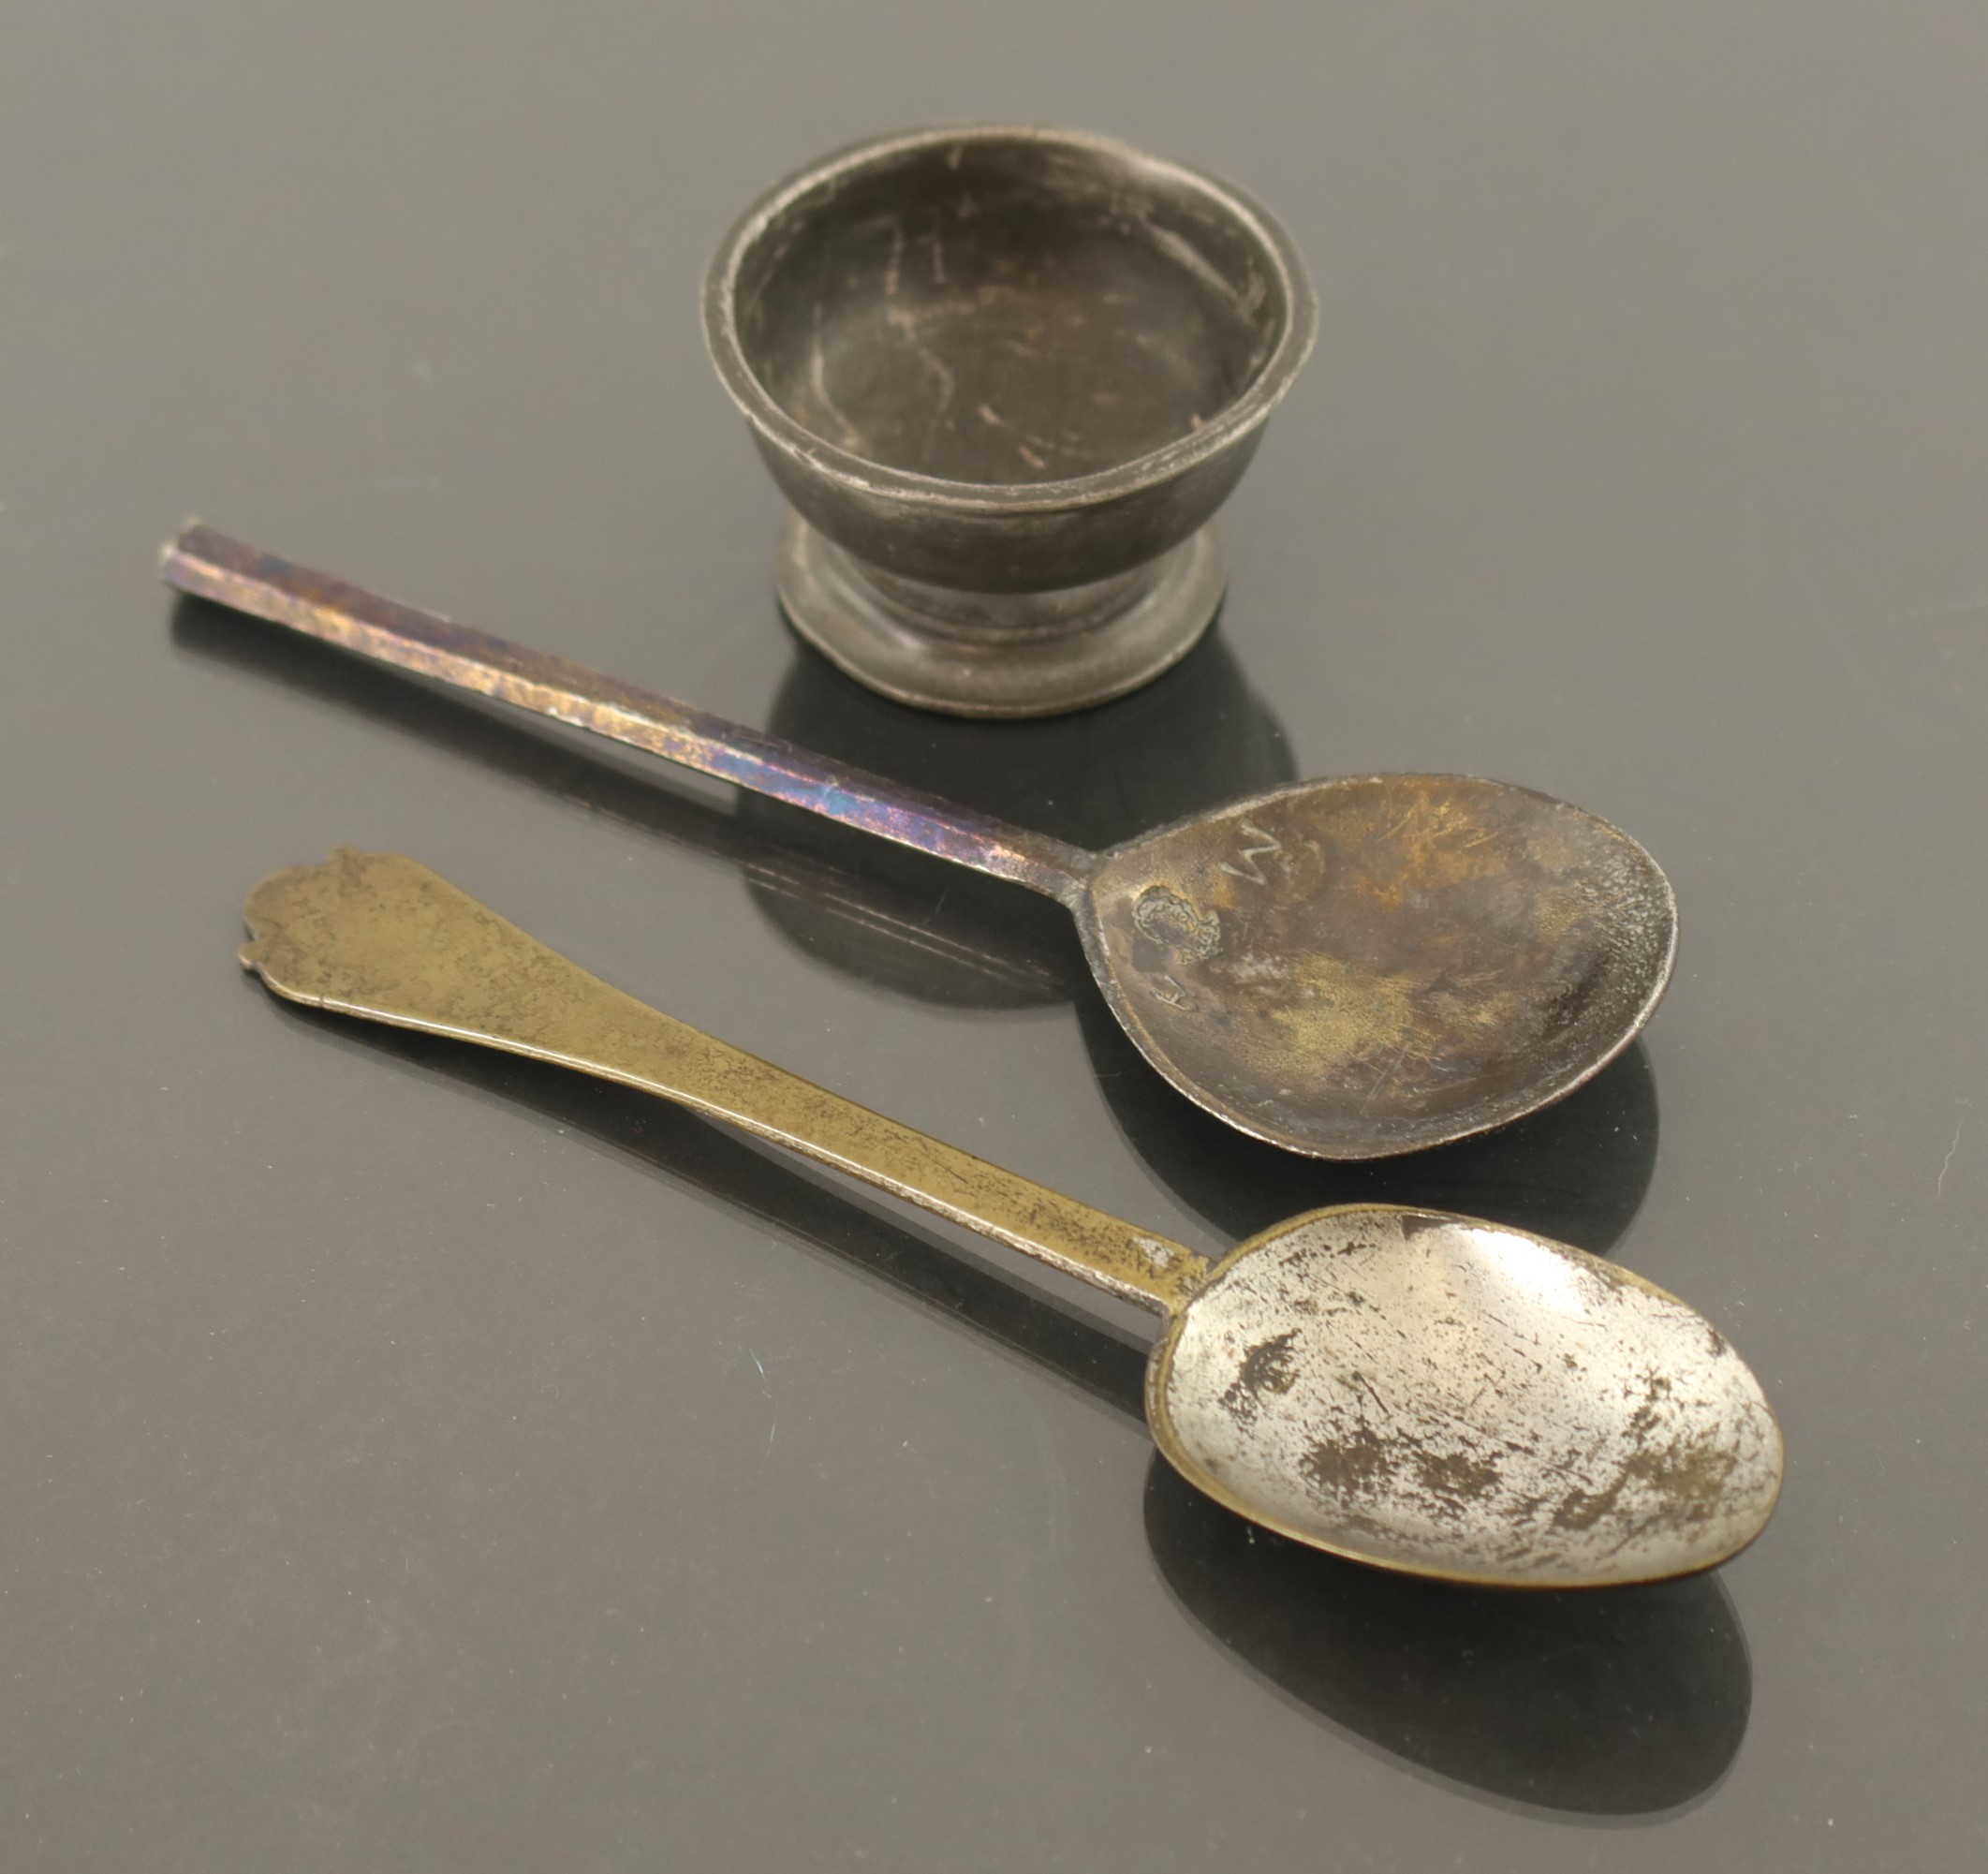 A 17th century excavated Dutch pewter spoon